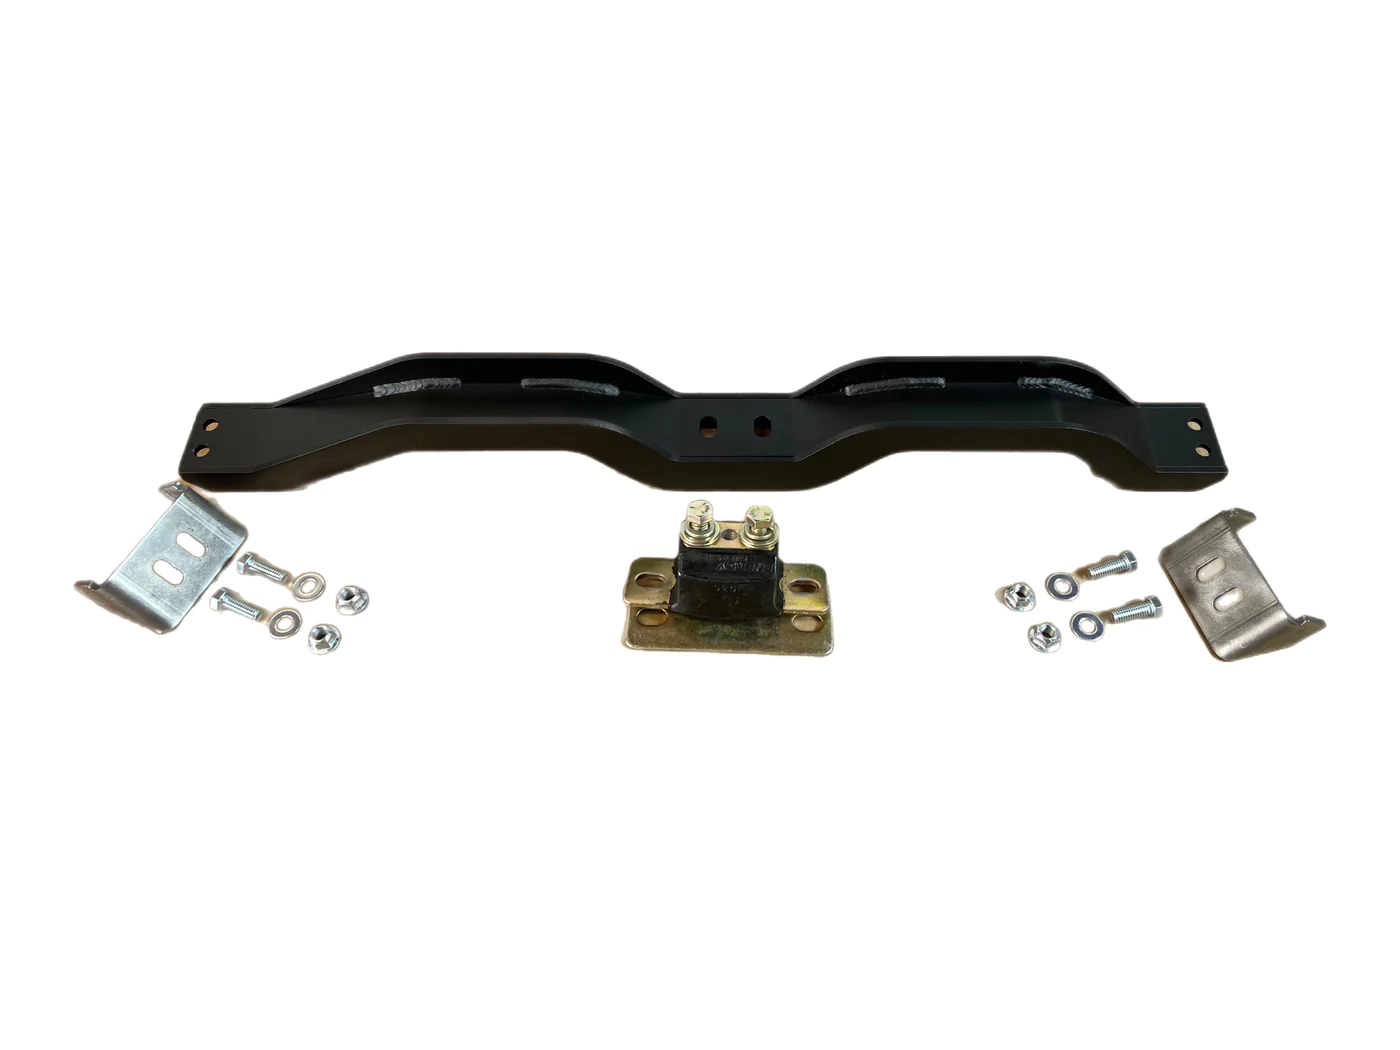 109422 Transmission Crossmember for 1979-2004 Ford Mustang w/ GM LS Engine Swap [Fits GM 4L80e, TH400 Transmissions]